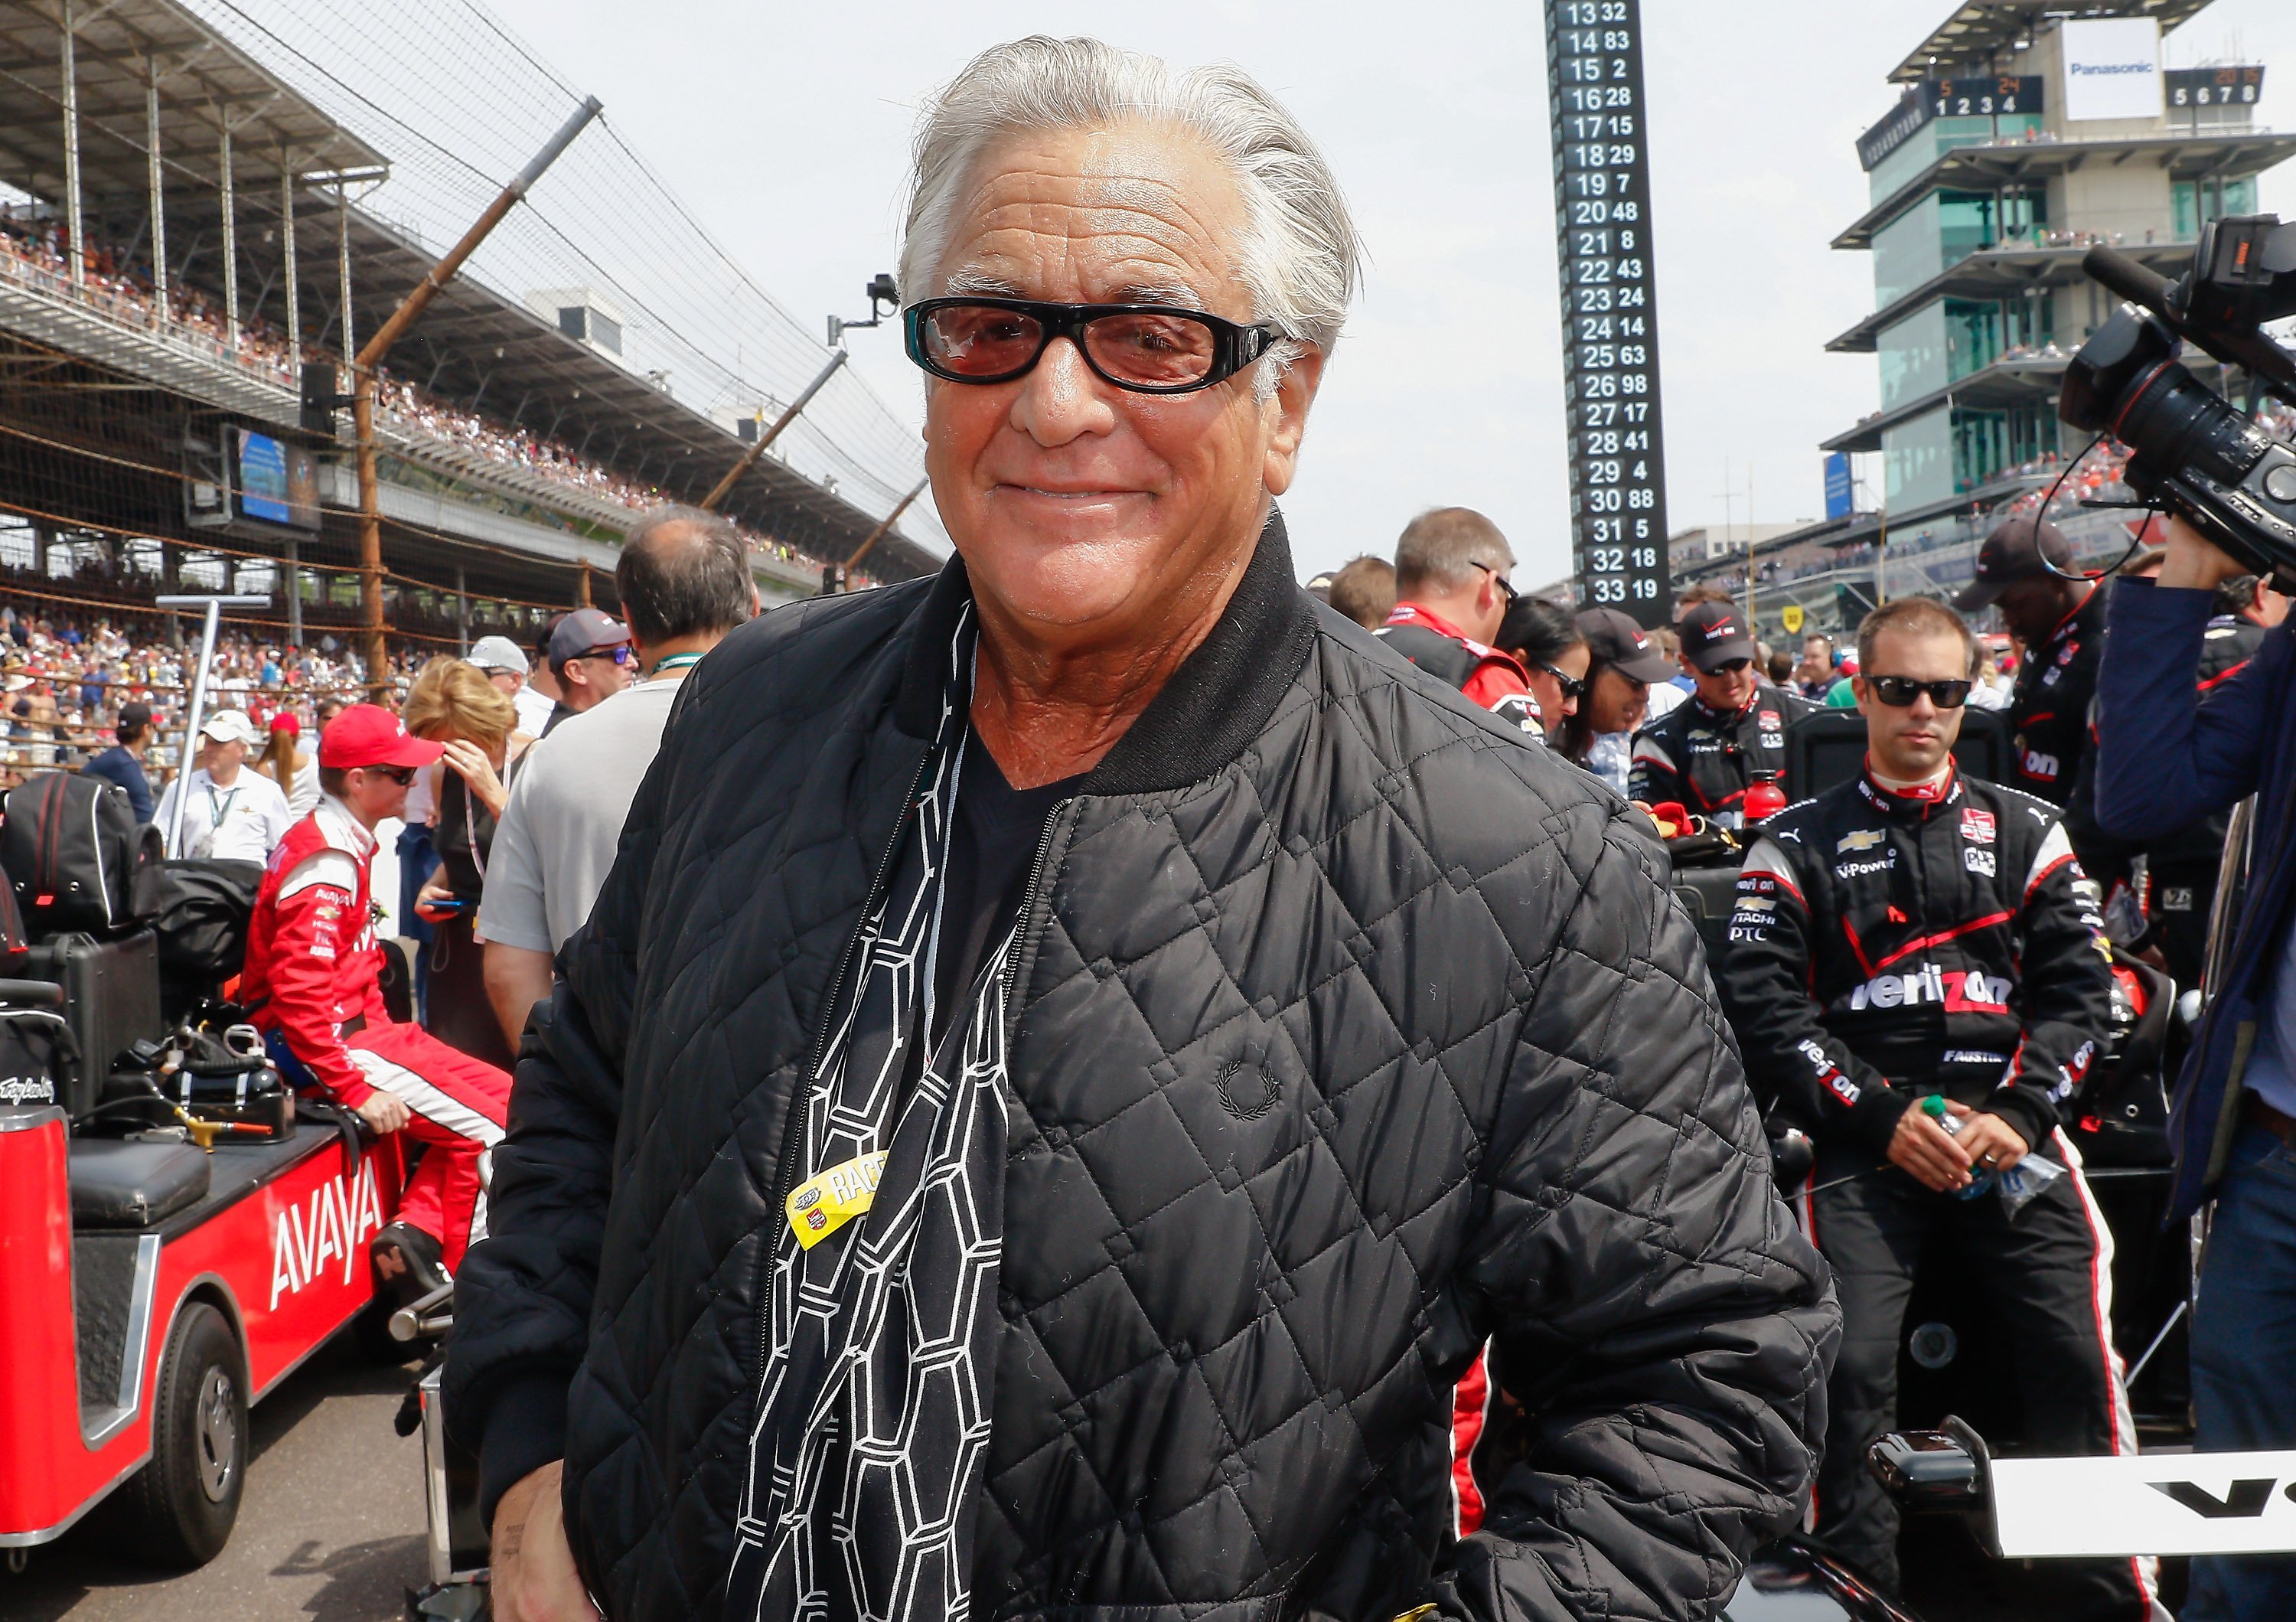 Barry Weiss at the Indy 500 in Indianapolis, Indiana | Photo: Getty Images